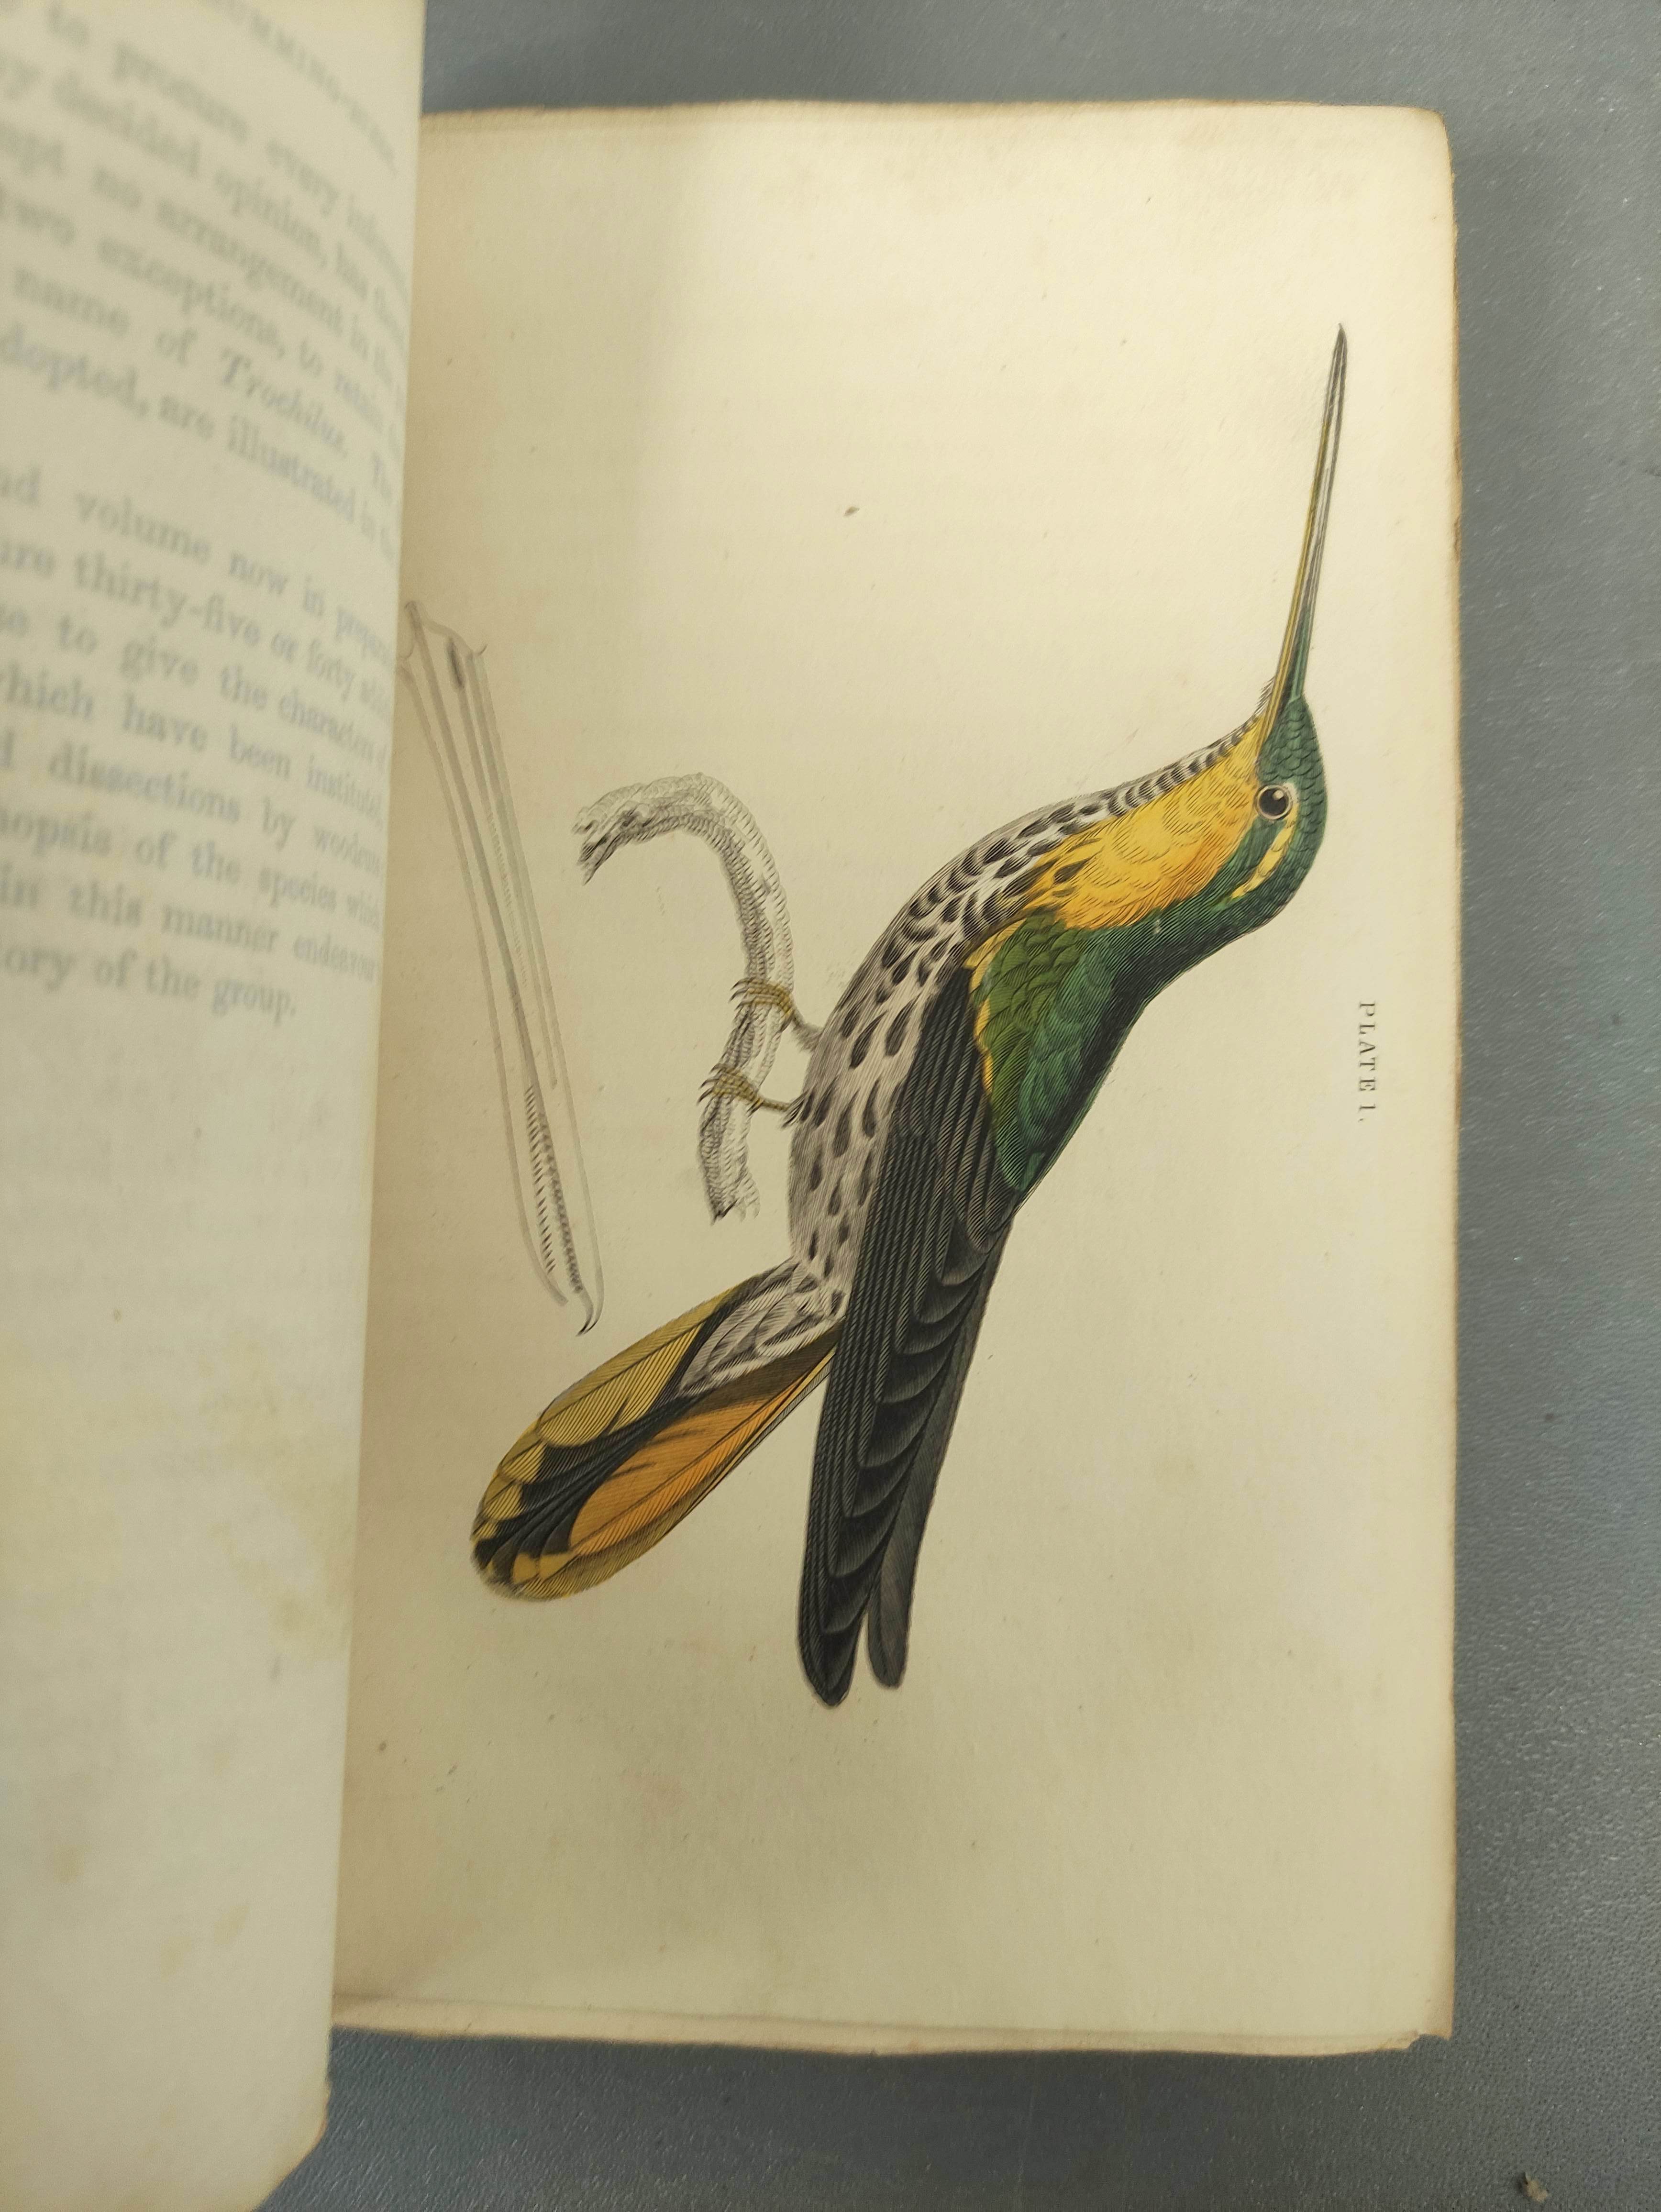 JARDINE SIR WILLIAM.  The Naturalist's Library. Ornithology vols. 1 & 2 re. Humming Birds. Eng. - Image 7 of 16